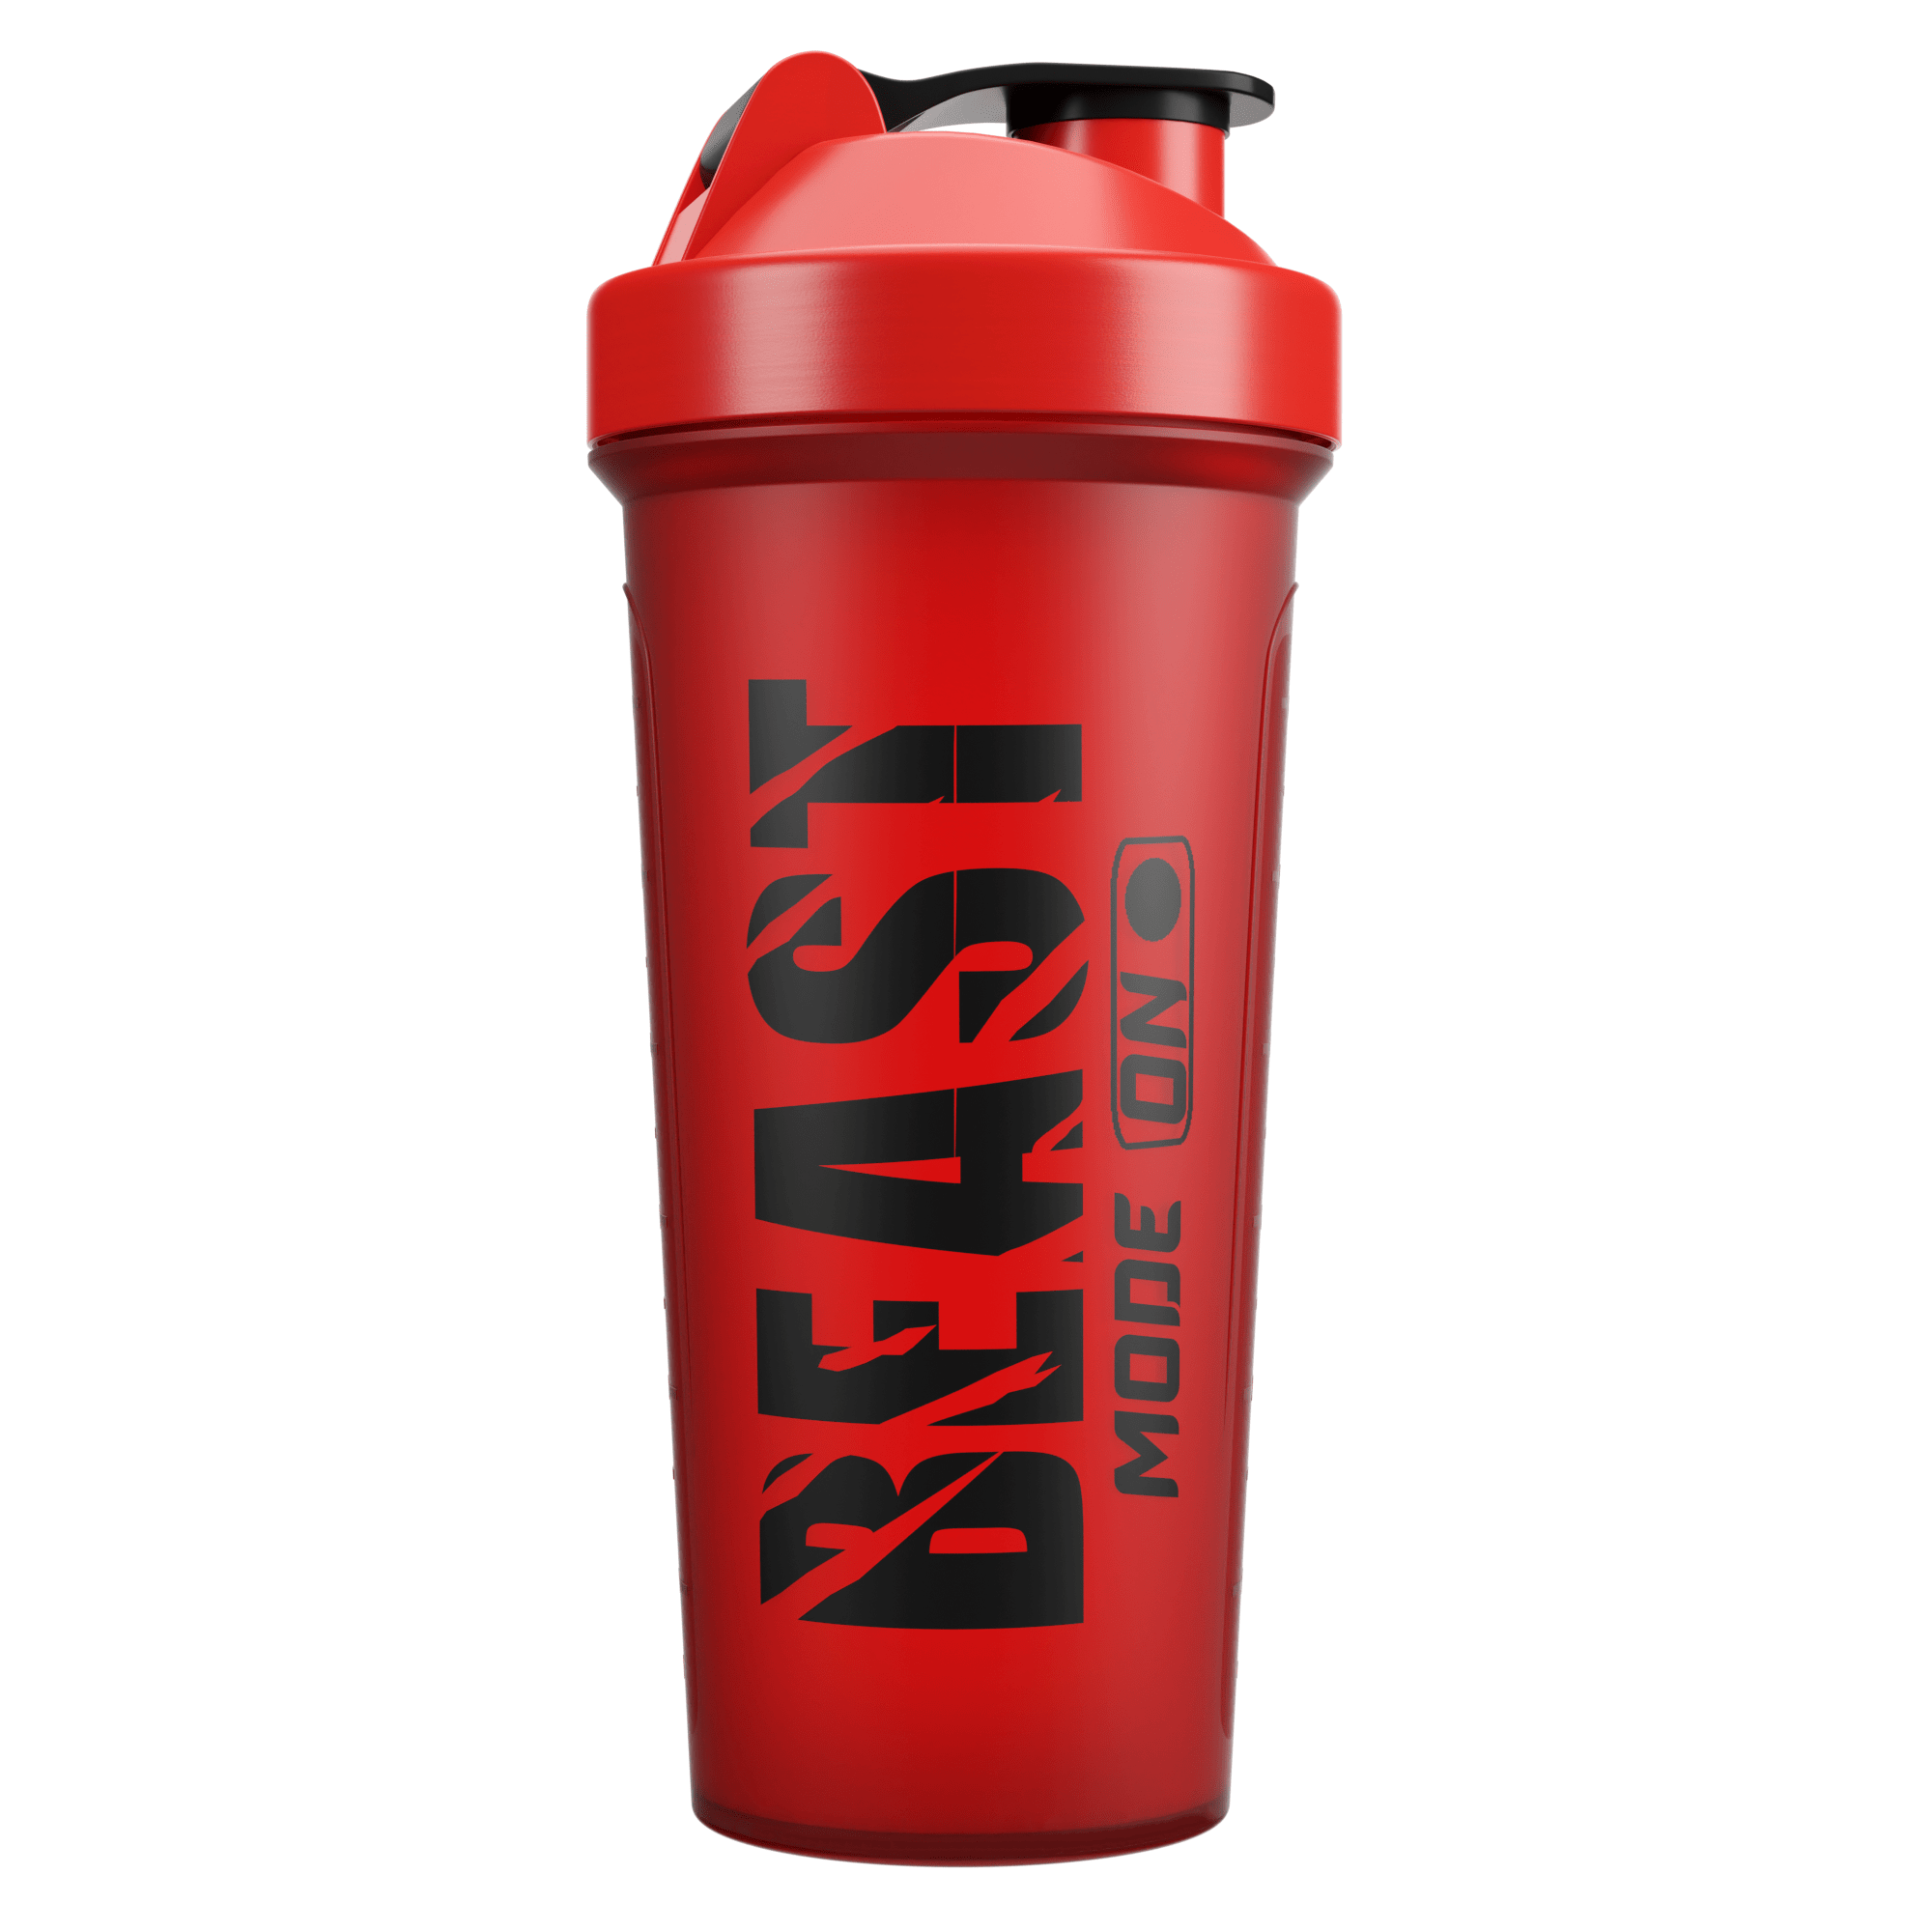 protein shaker cup for workout gym, men women fitness smoothie shaker bottle